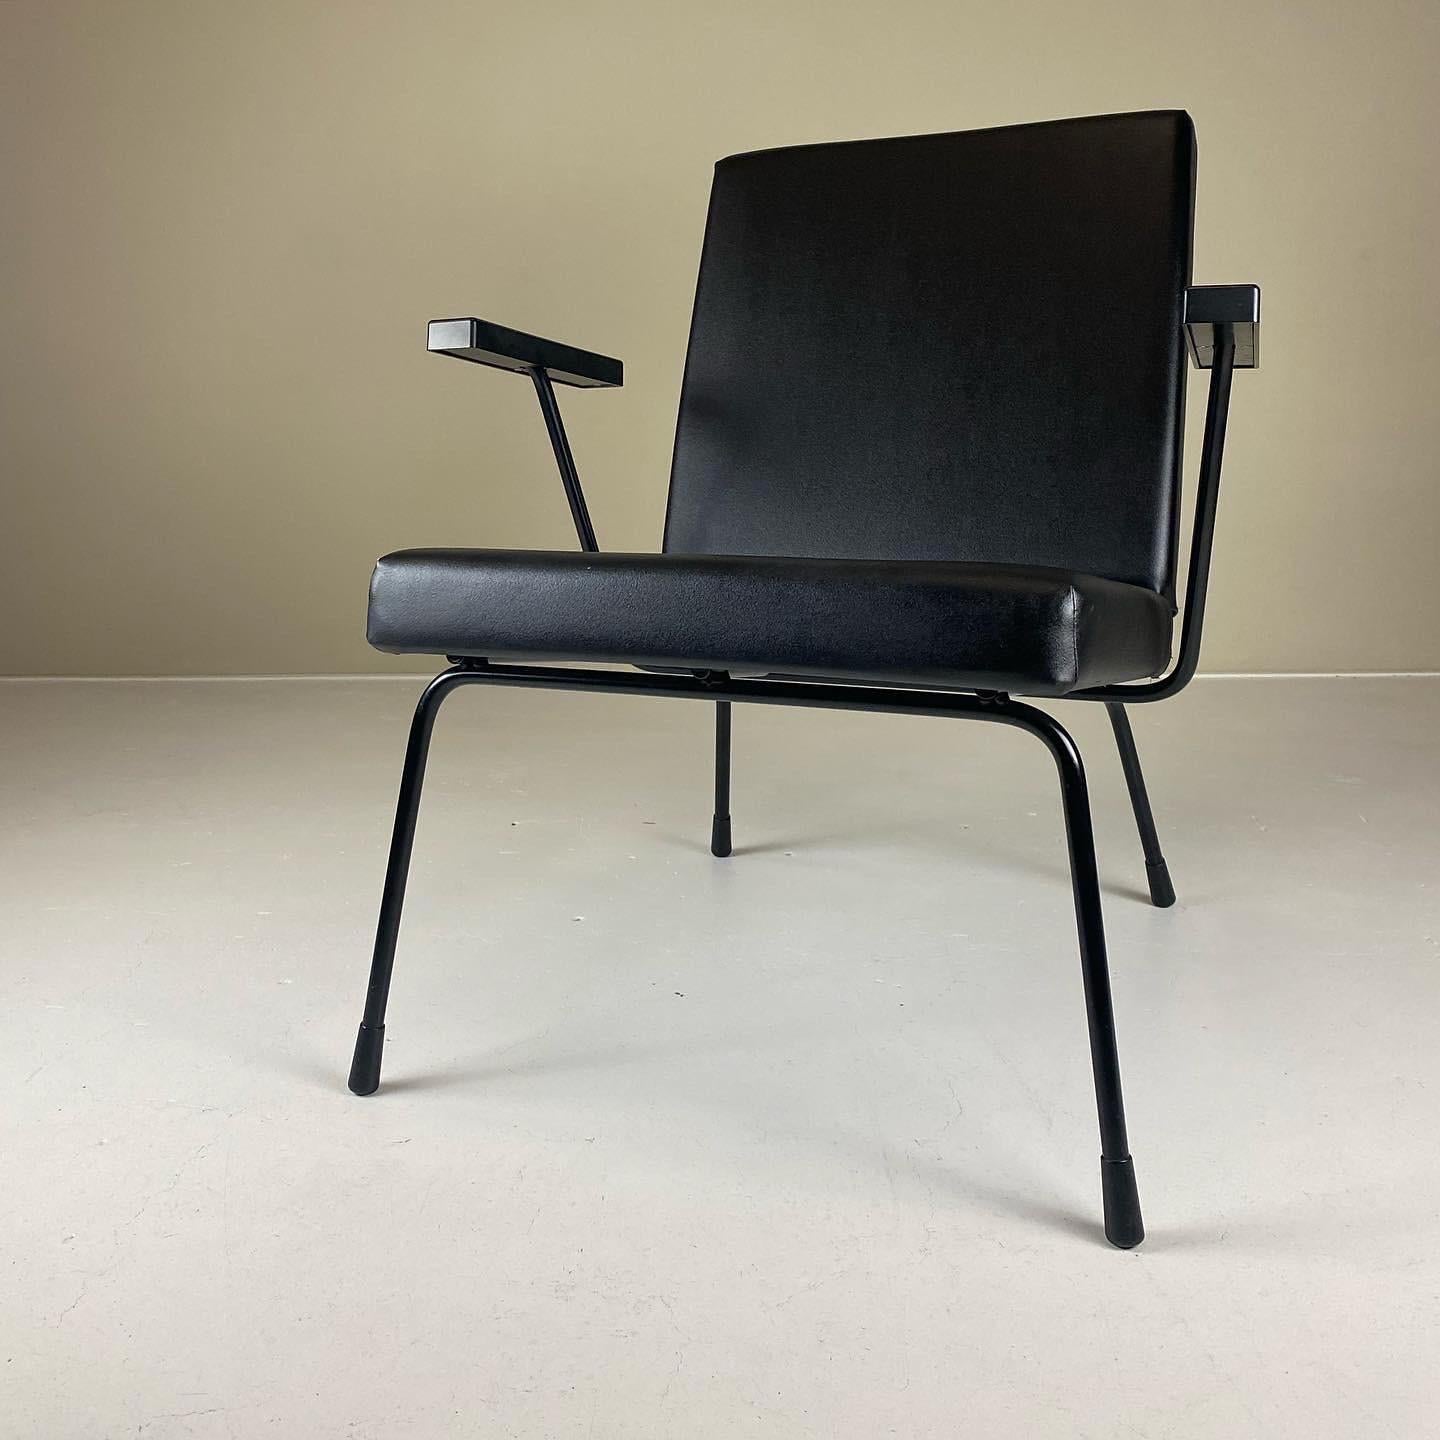 Launched in 1954 as an affordable armchair for Dutch homes and a design classic ever since, this 1407 armchair is designed by Wim Rietveld (son of Gerrit Rietveld) and Andre Cordemeyer for Dutch manufacturer Gispen. The chair was first shown at the